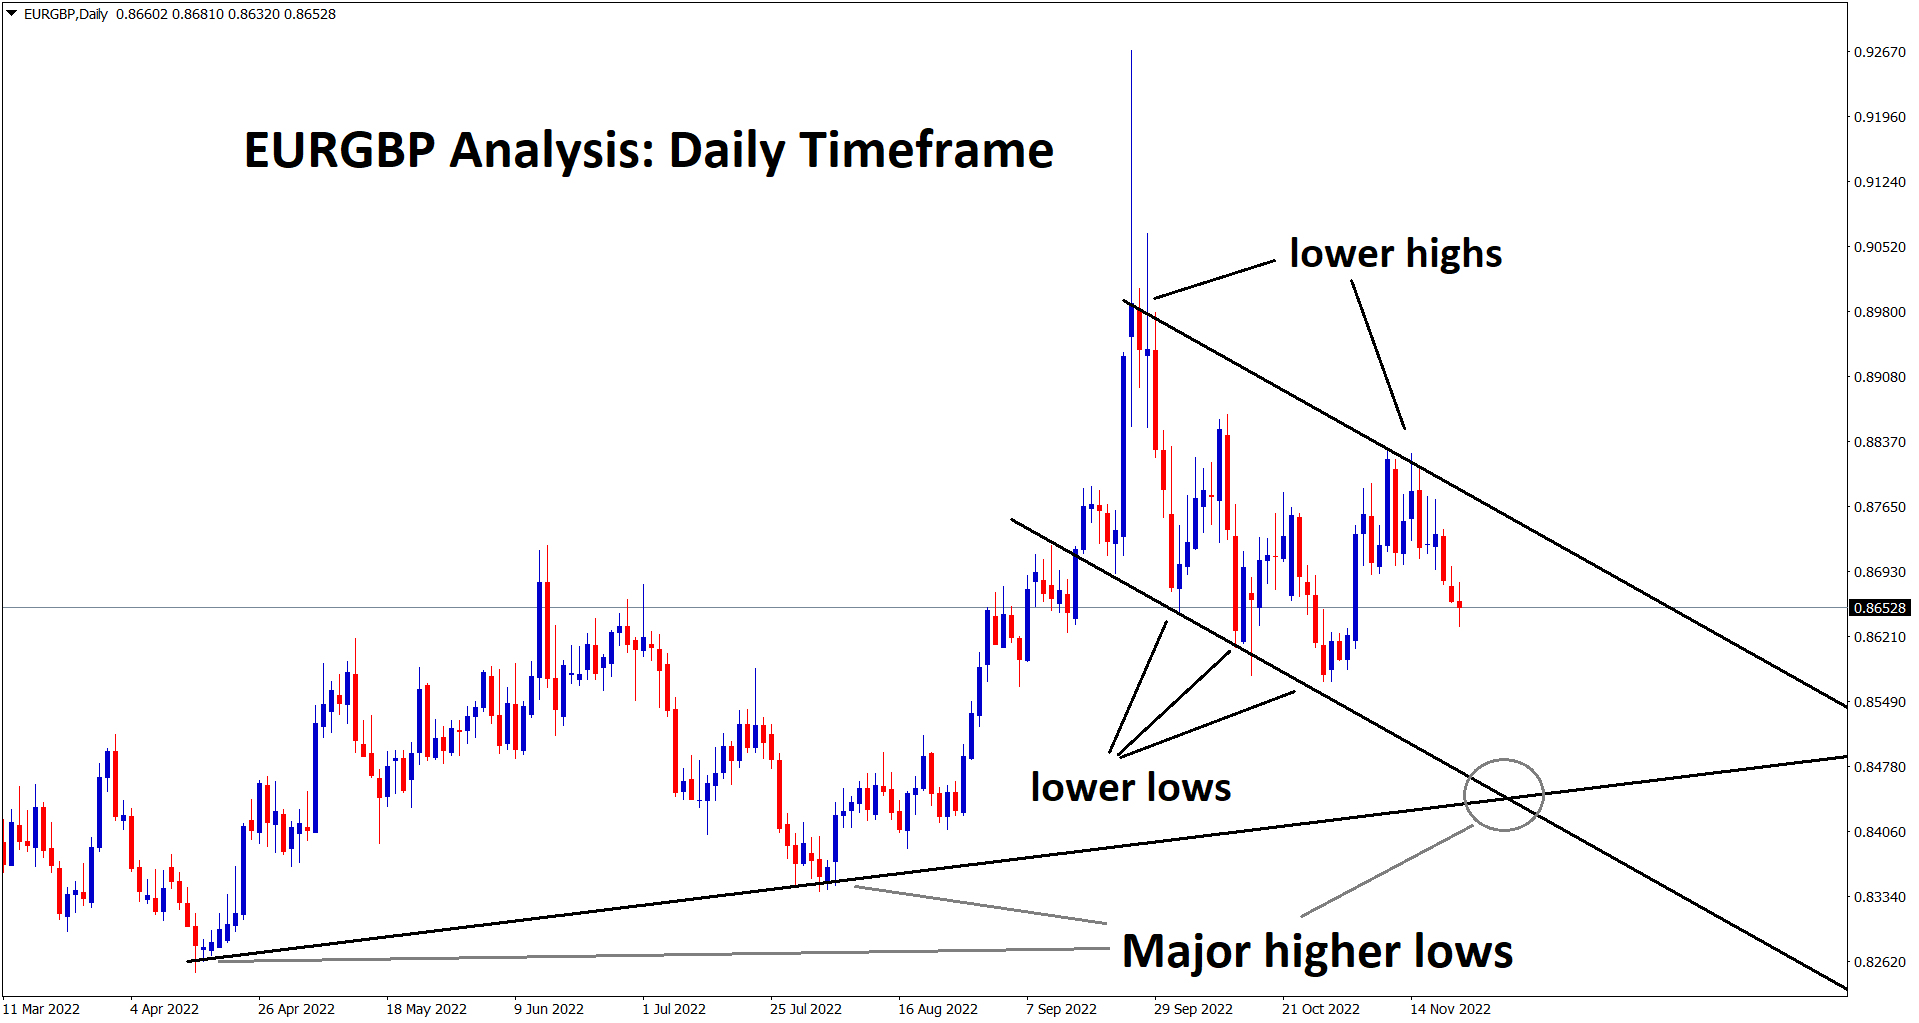 EURGBP is moving to the lower area in the daily timeframe